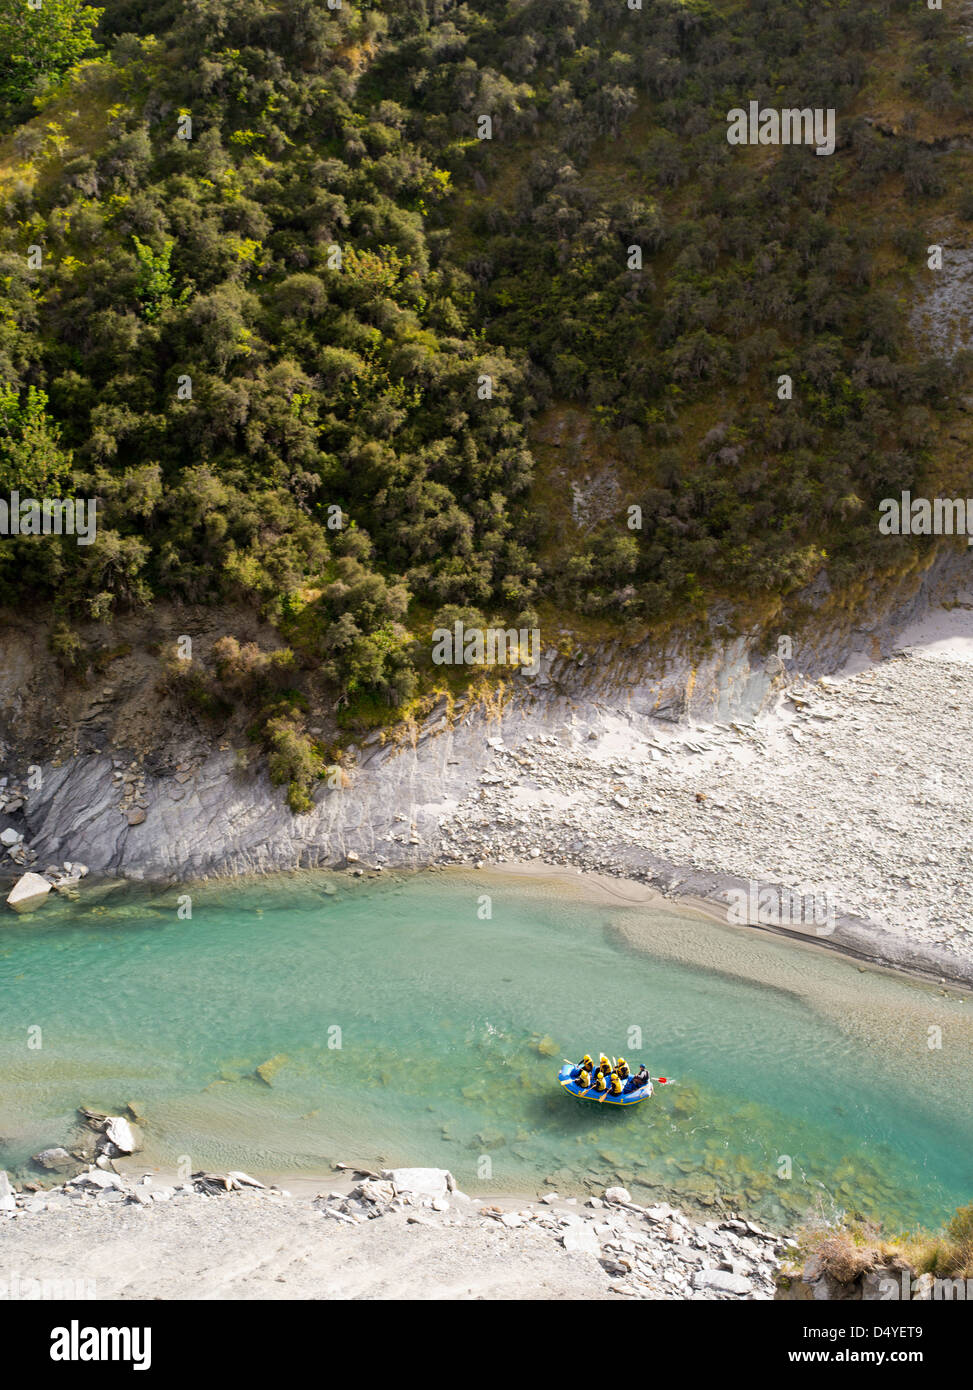 A group of people rafts down the Shotover River in Skipper's Canyon, near Queenstown, Otago, New Zealand. Stock Photo